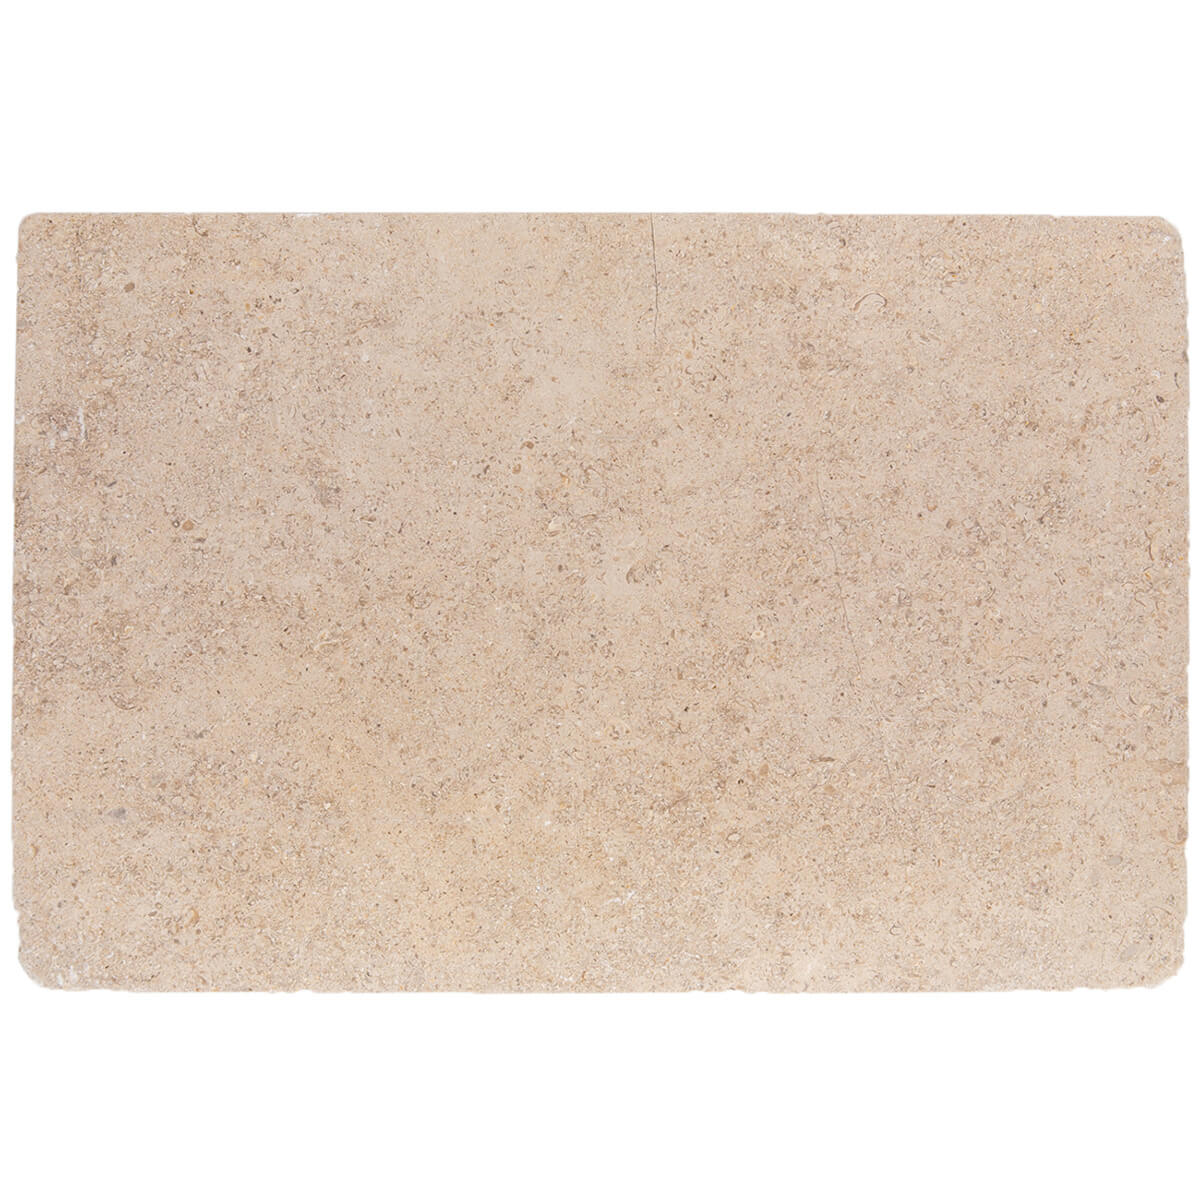 haussmann cecina limestone rectangle natural stone field tile 16x24 tumbled brushed